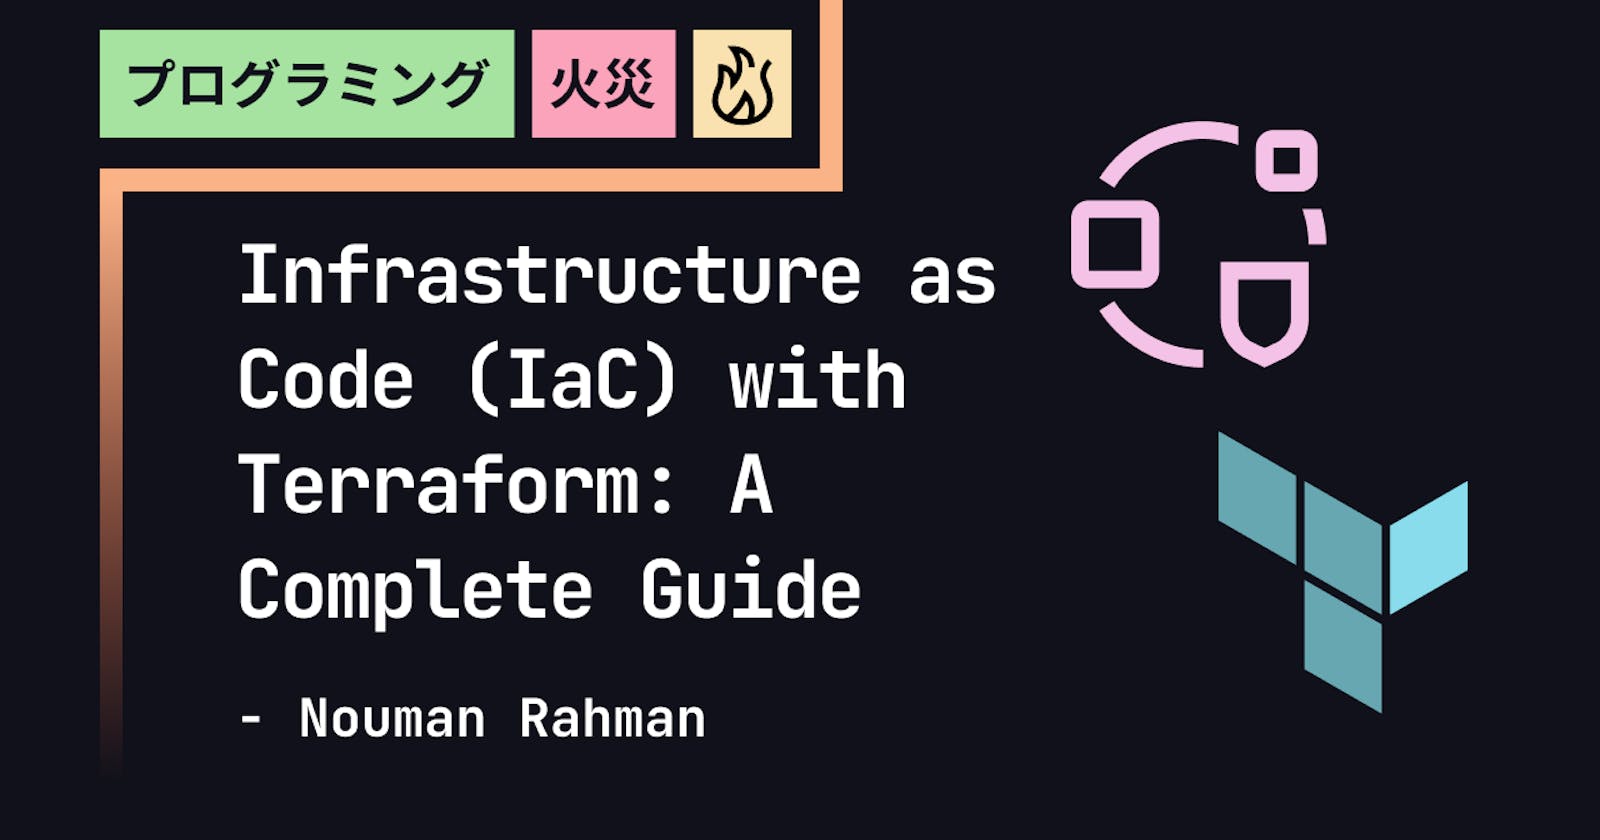 Infrastructure as Code (IaC) with Terraform: A Complete Guide